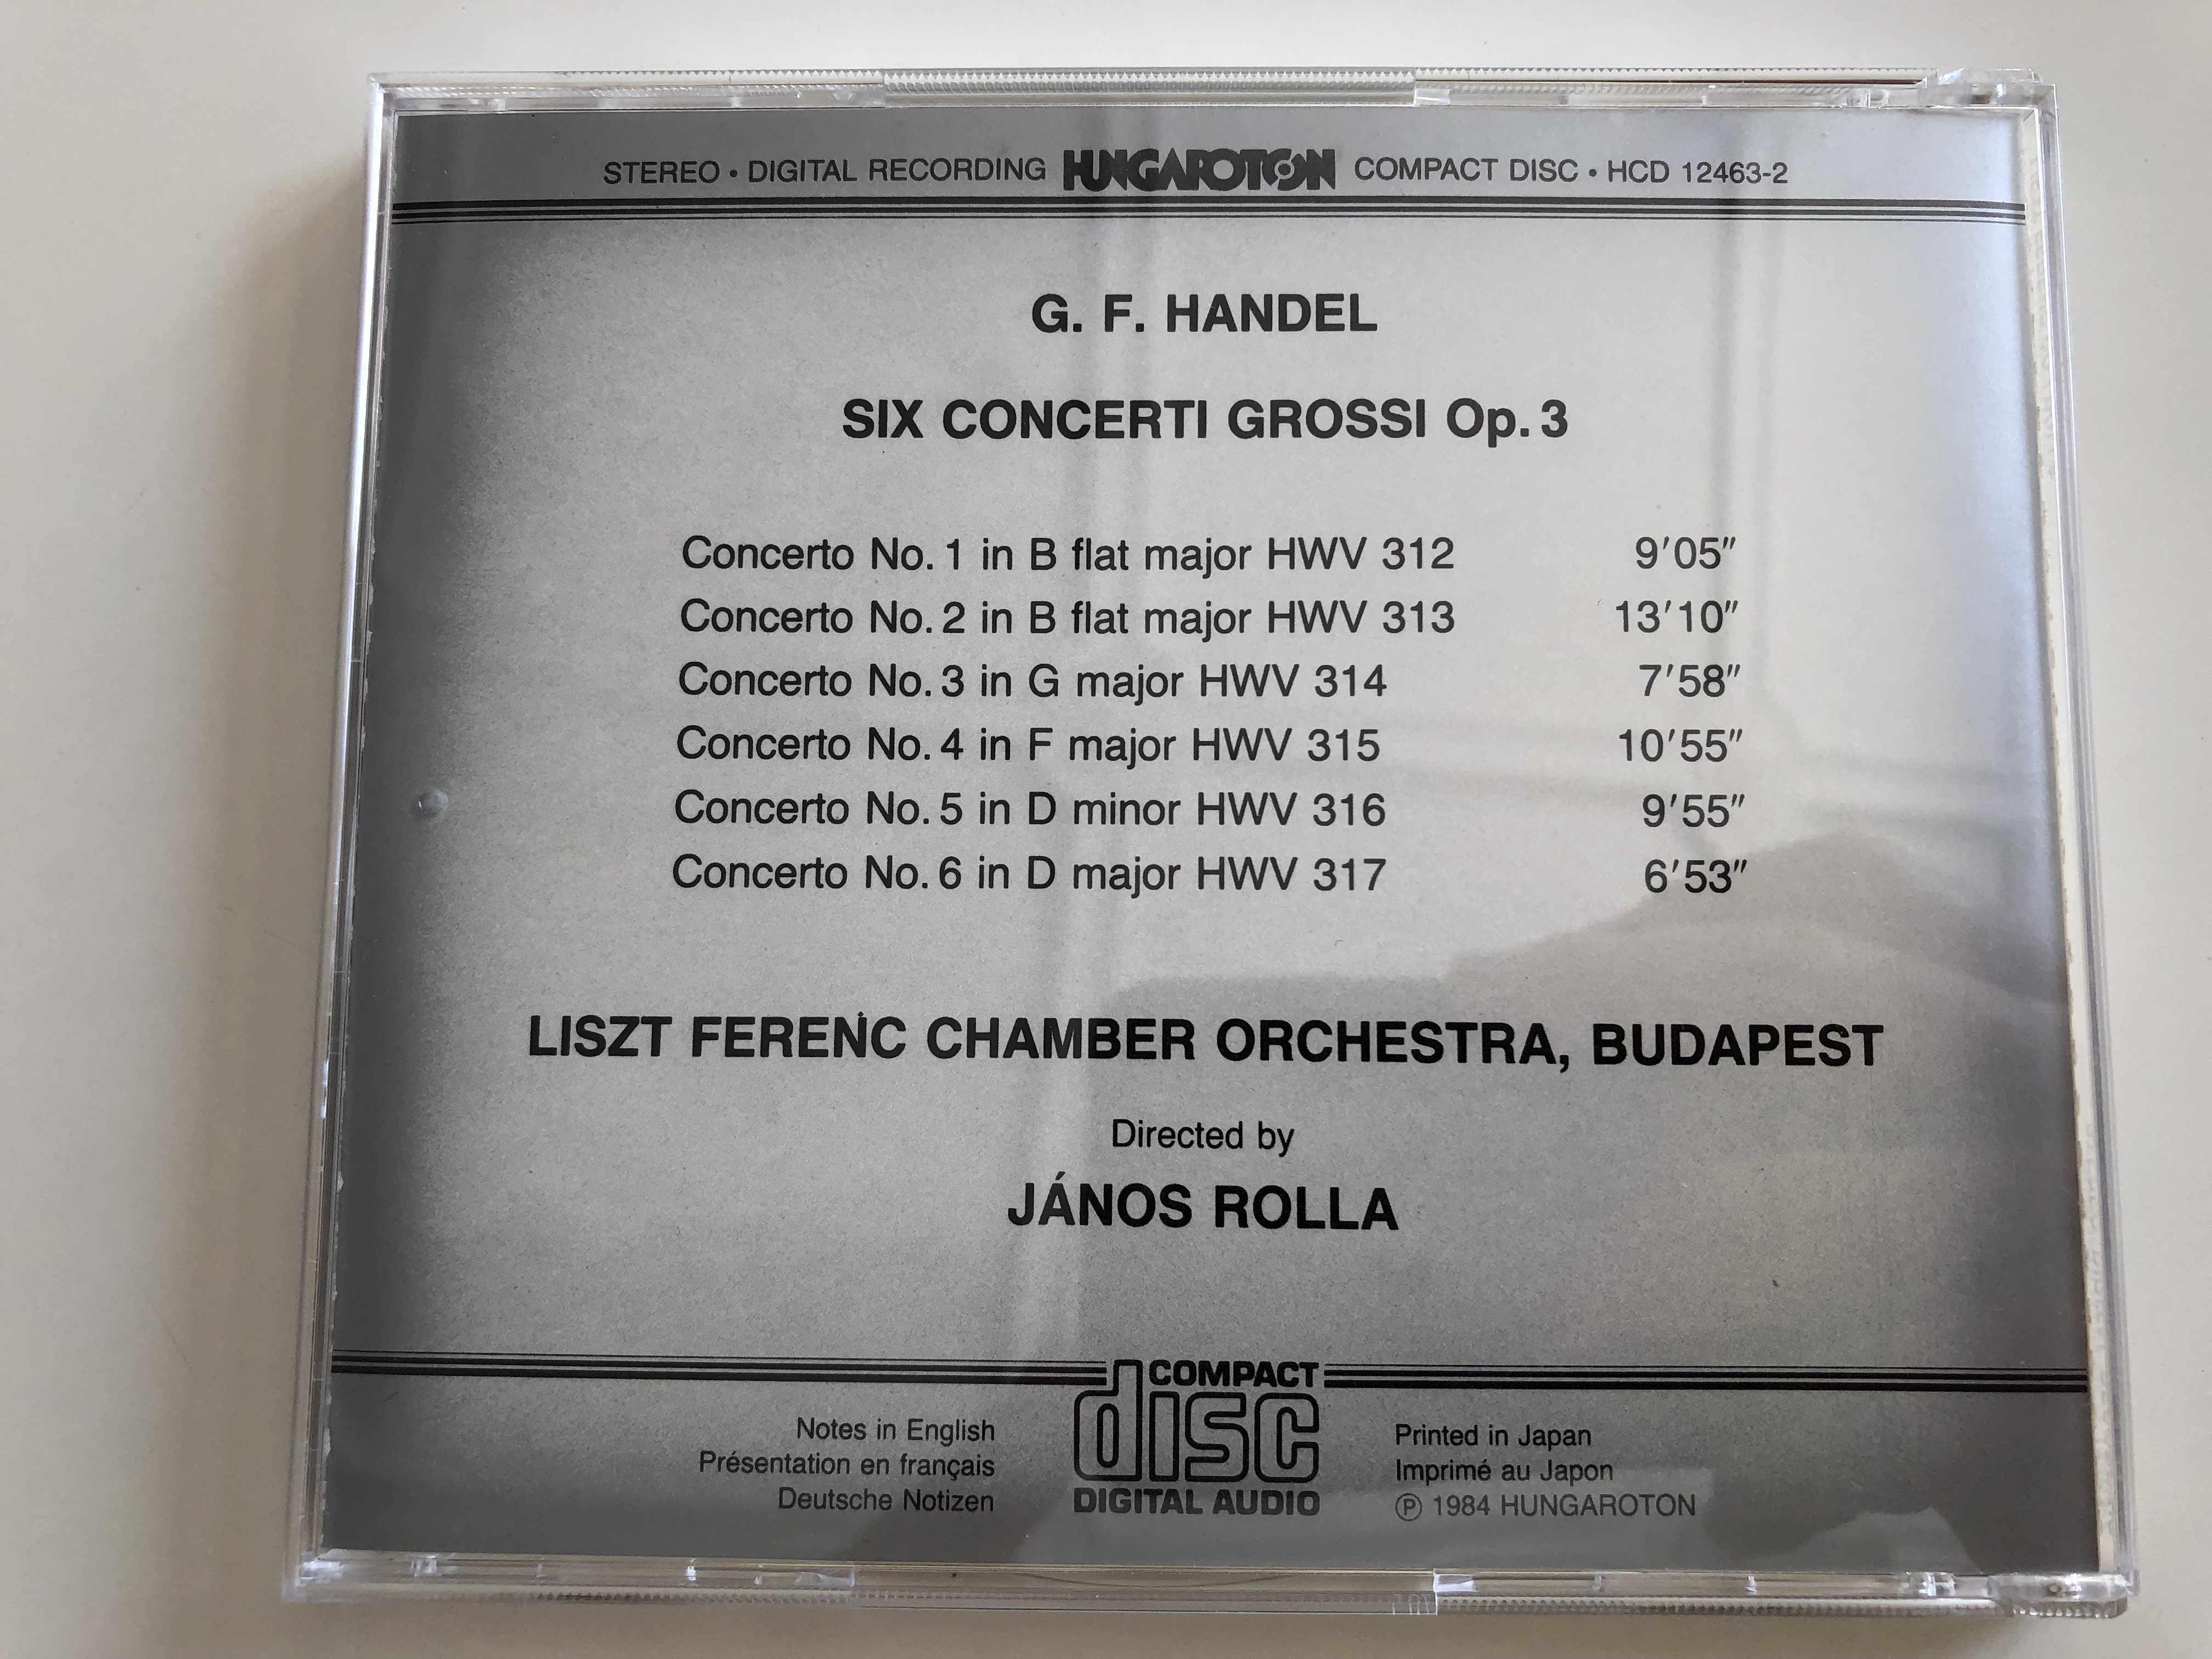 handel-6-concerti-grossi-from-op.3-liszt-ferenc-chamber-orchestra-budapest-conducted-by-j-nos-rolla-hungaroton-audio-cd-1984-hcd-12463-2-8-.jpg